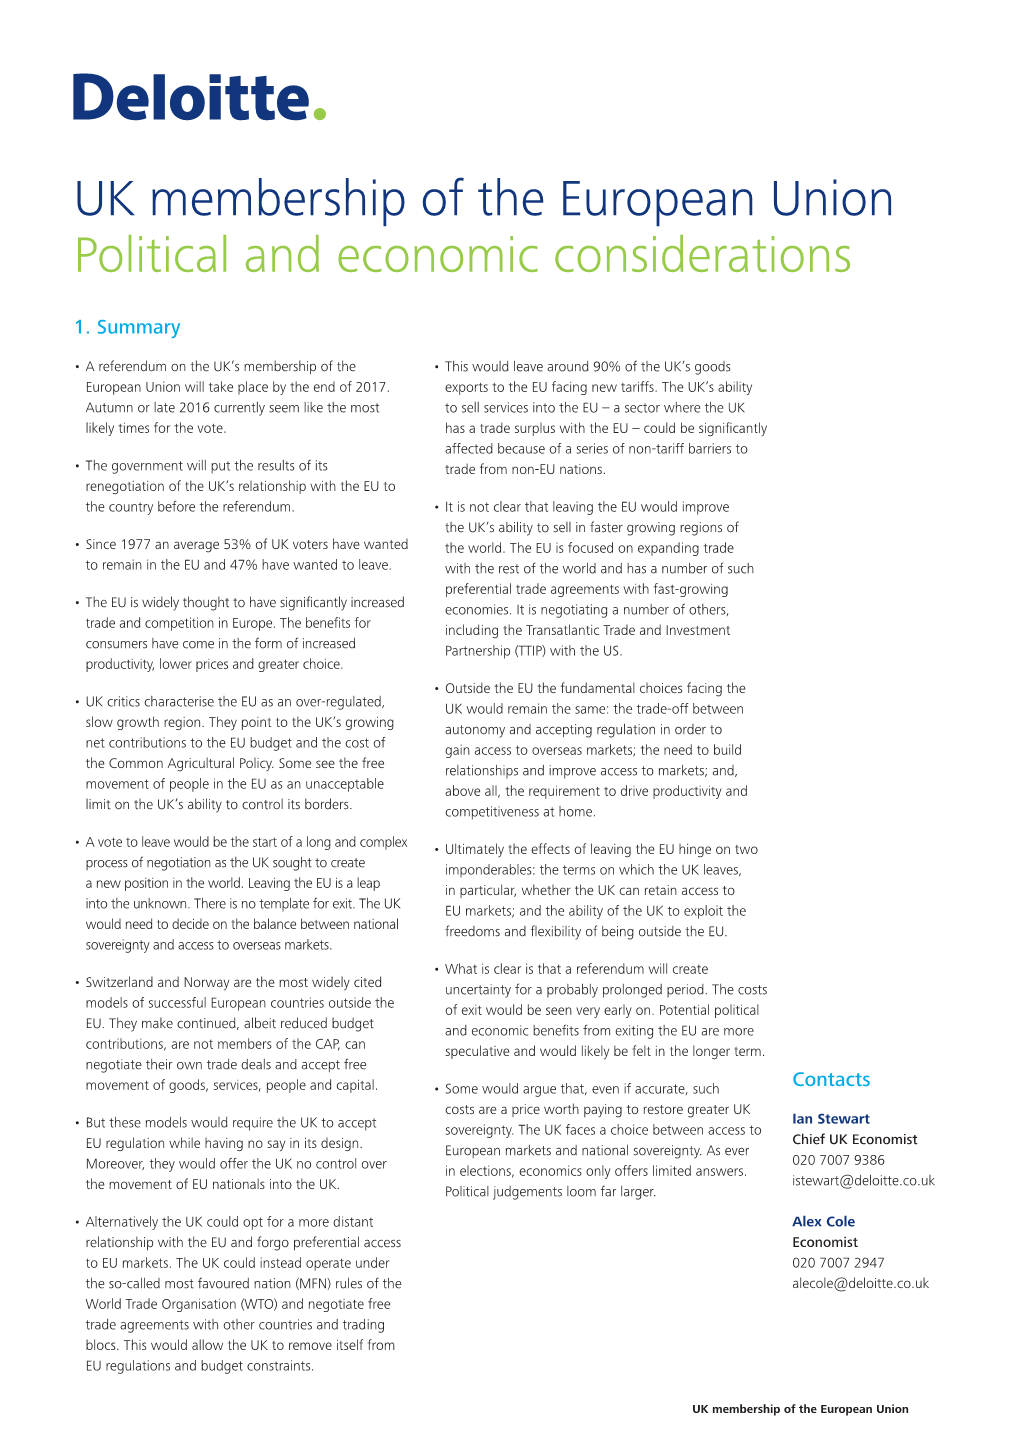 UK Membership of the European Union Political and Economic Considerations